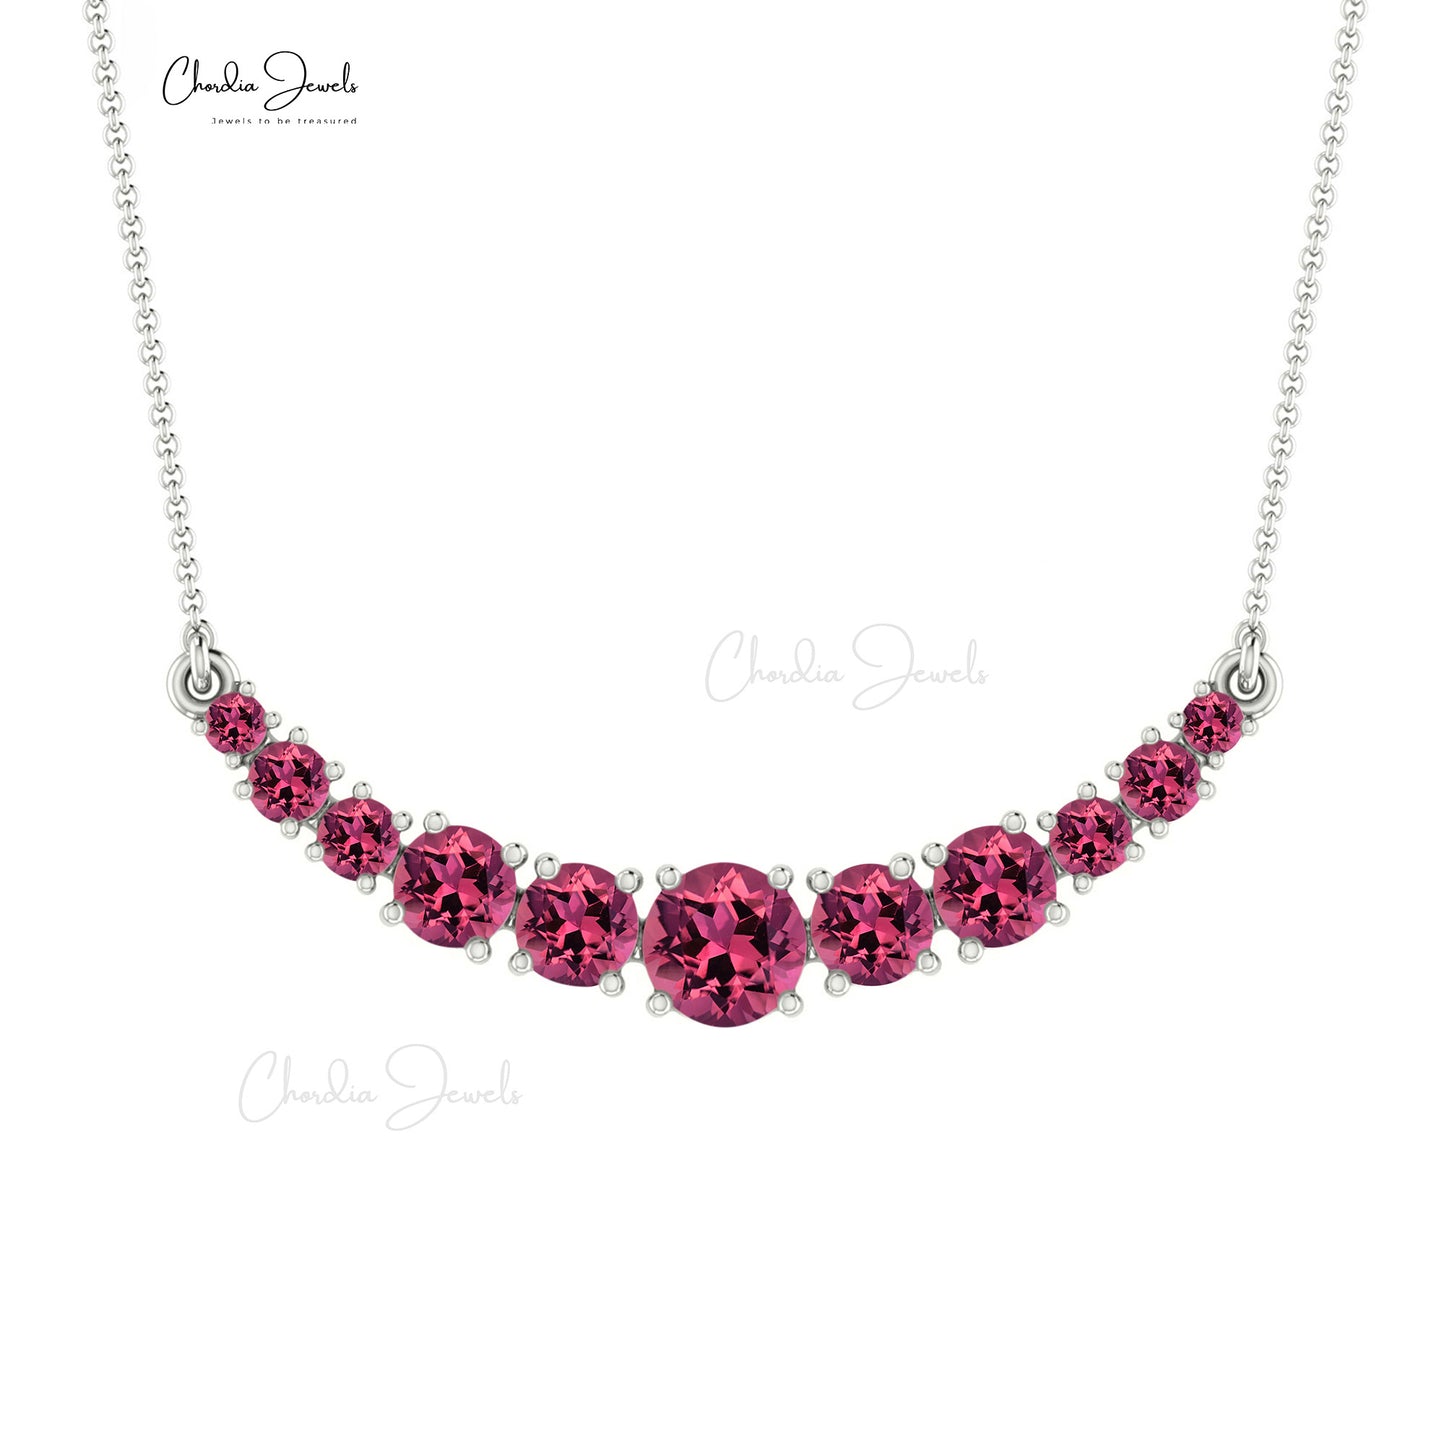 Sparkling Women Statement Necklace in Pink and Peach Beads